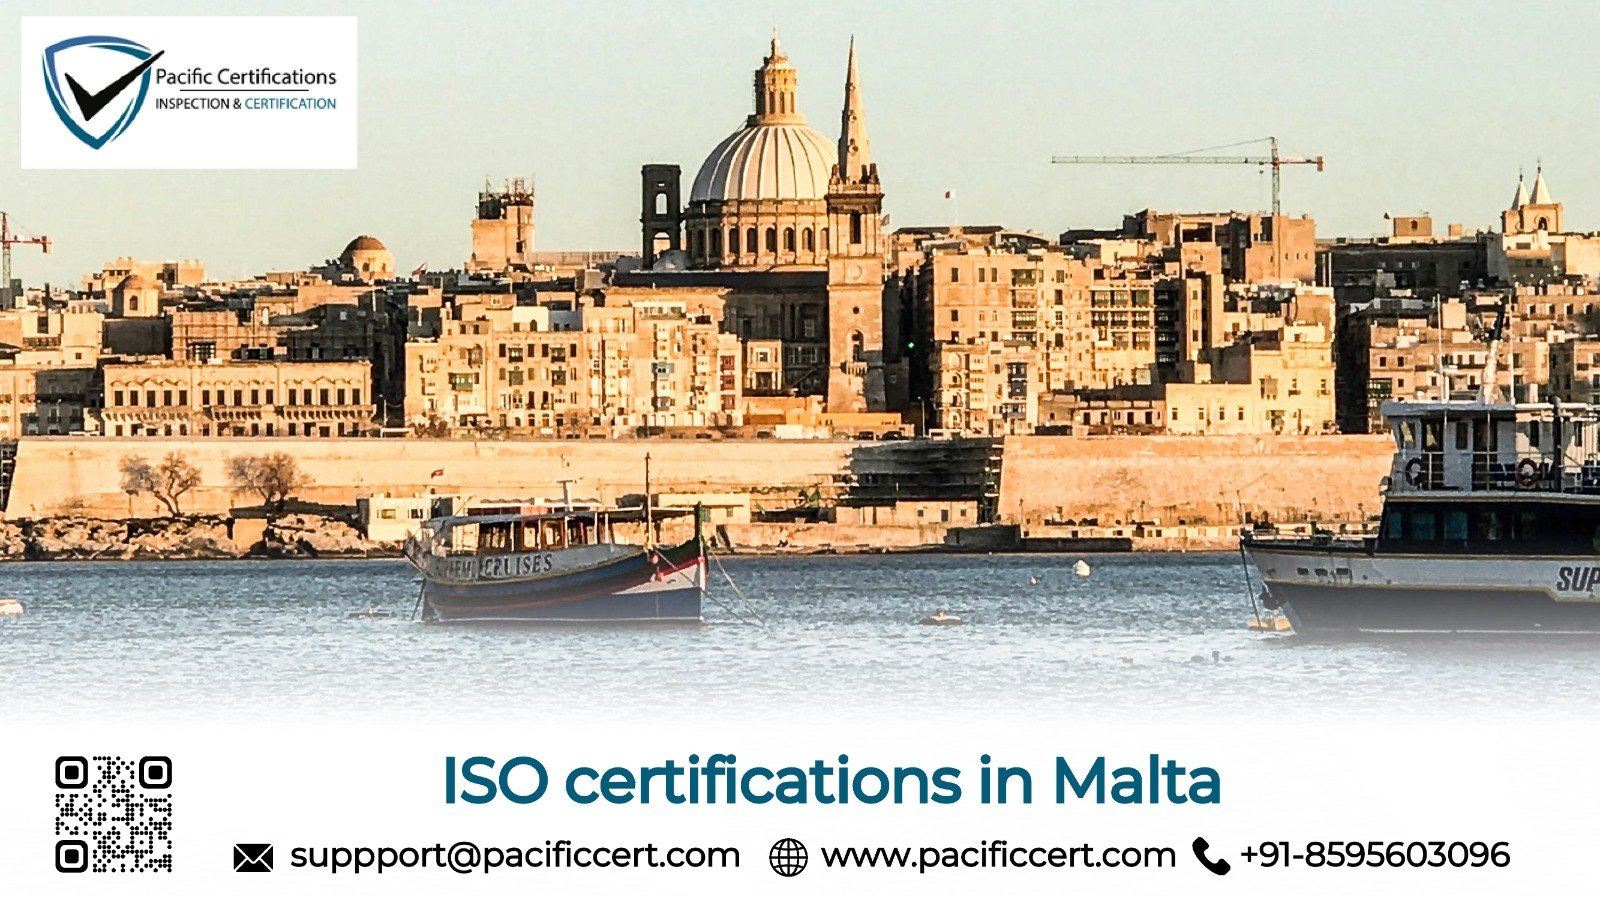 ISO Certifications in Malta and How Pacific Certifications can help